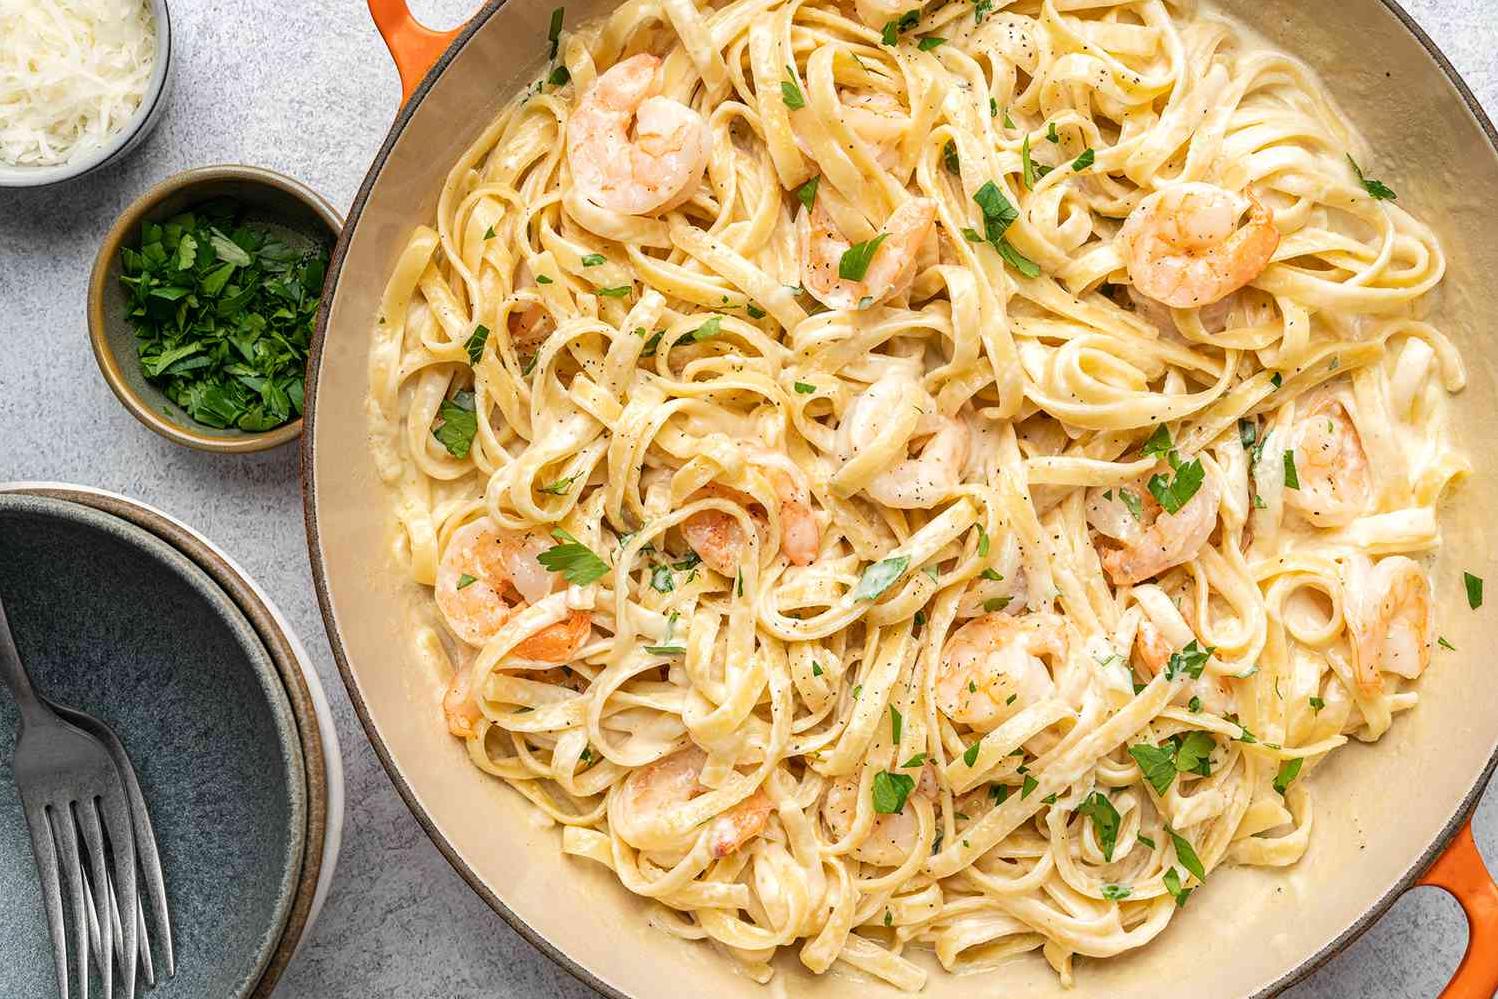  Nothing beats a big bowl of hot and savory shrimp fettuccine on a chilly evening.